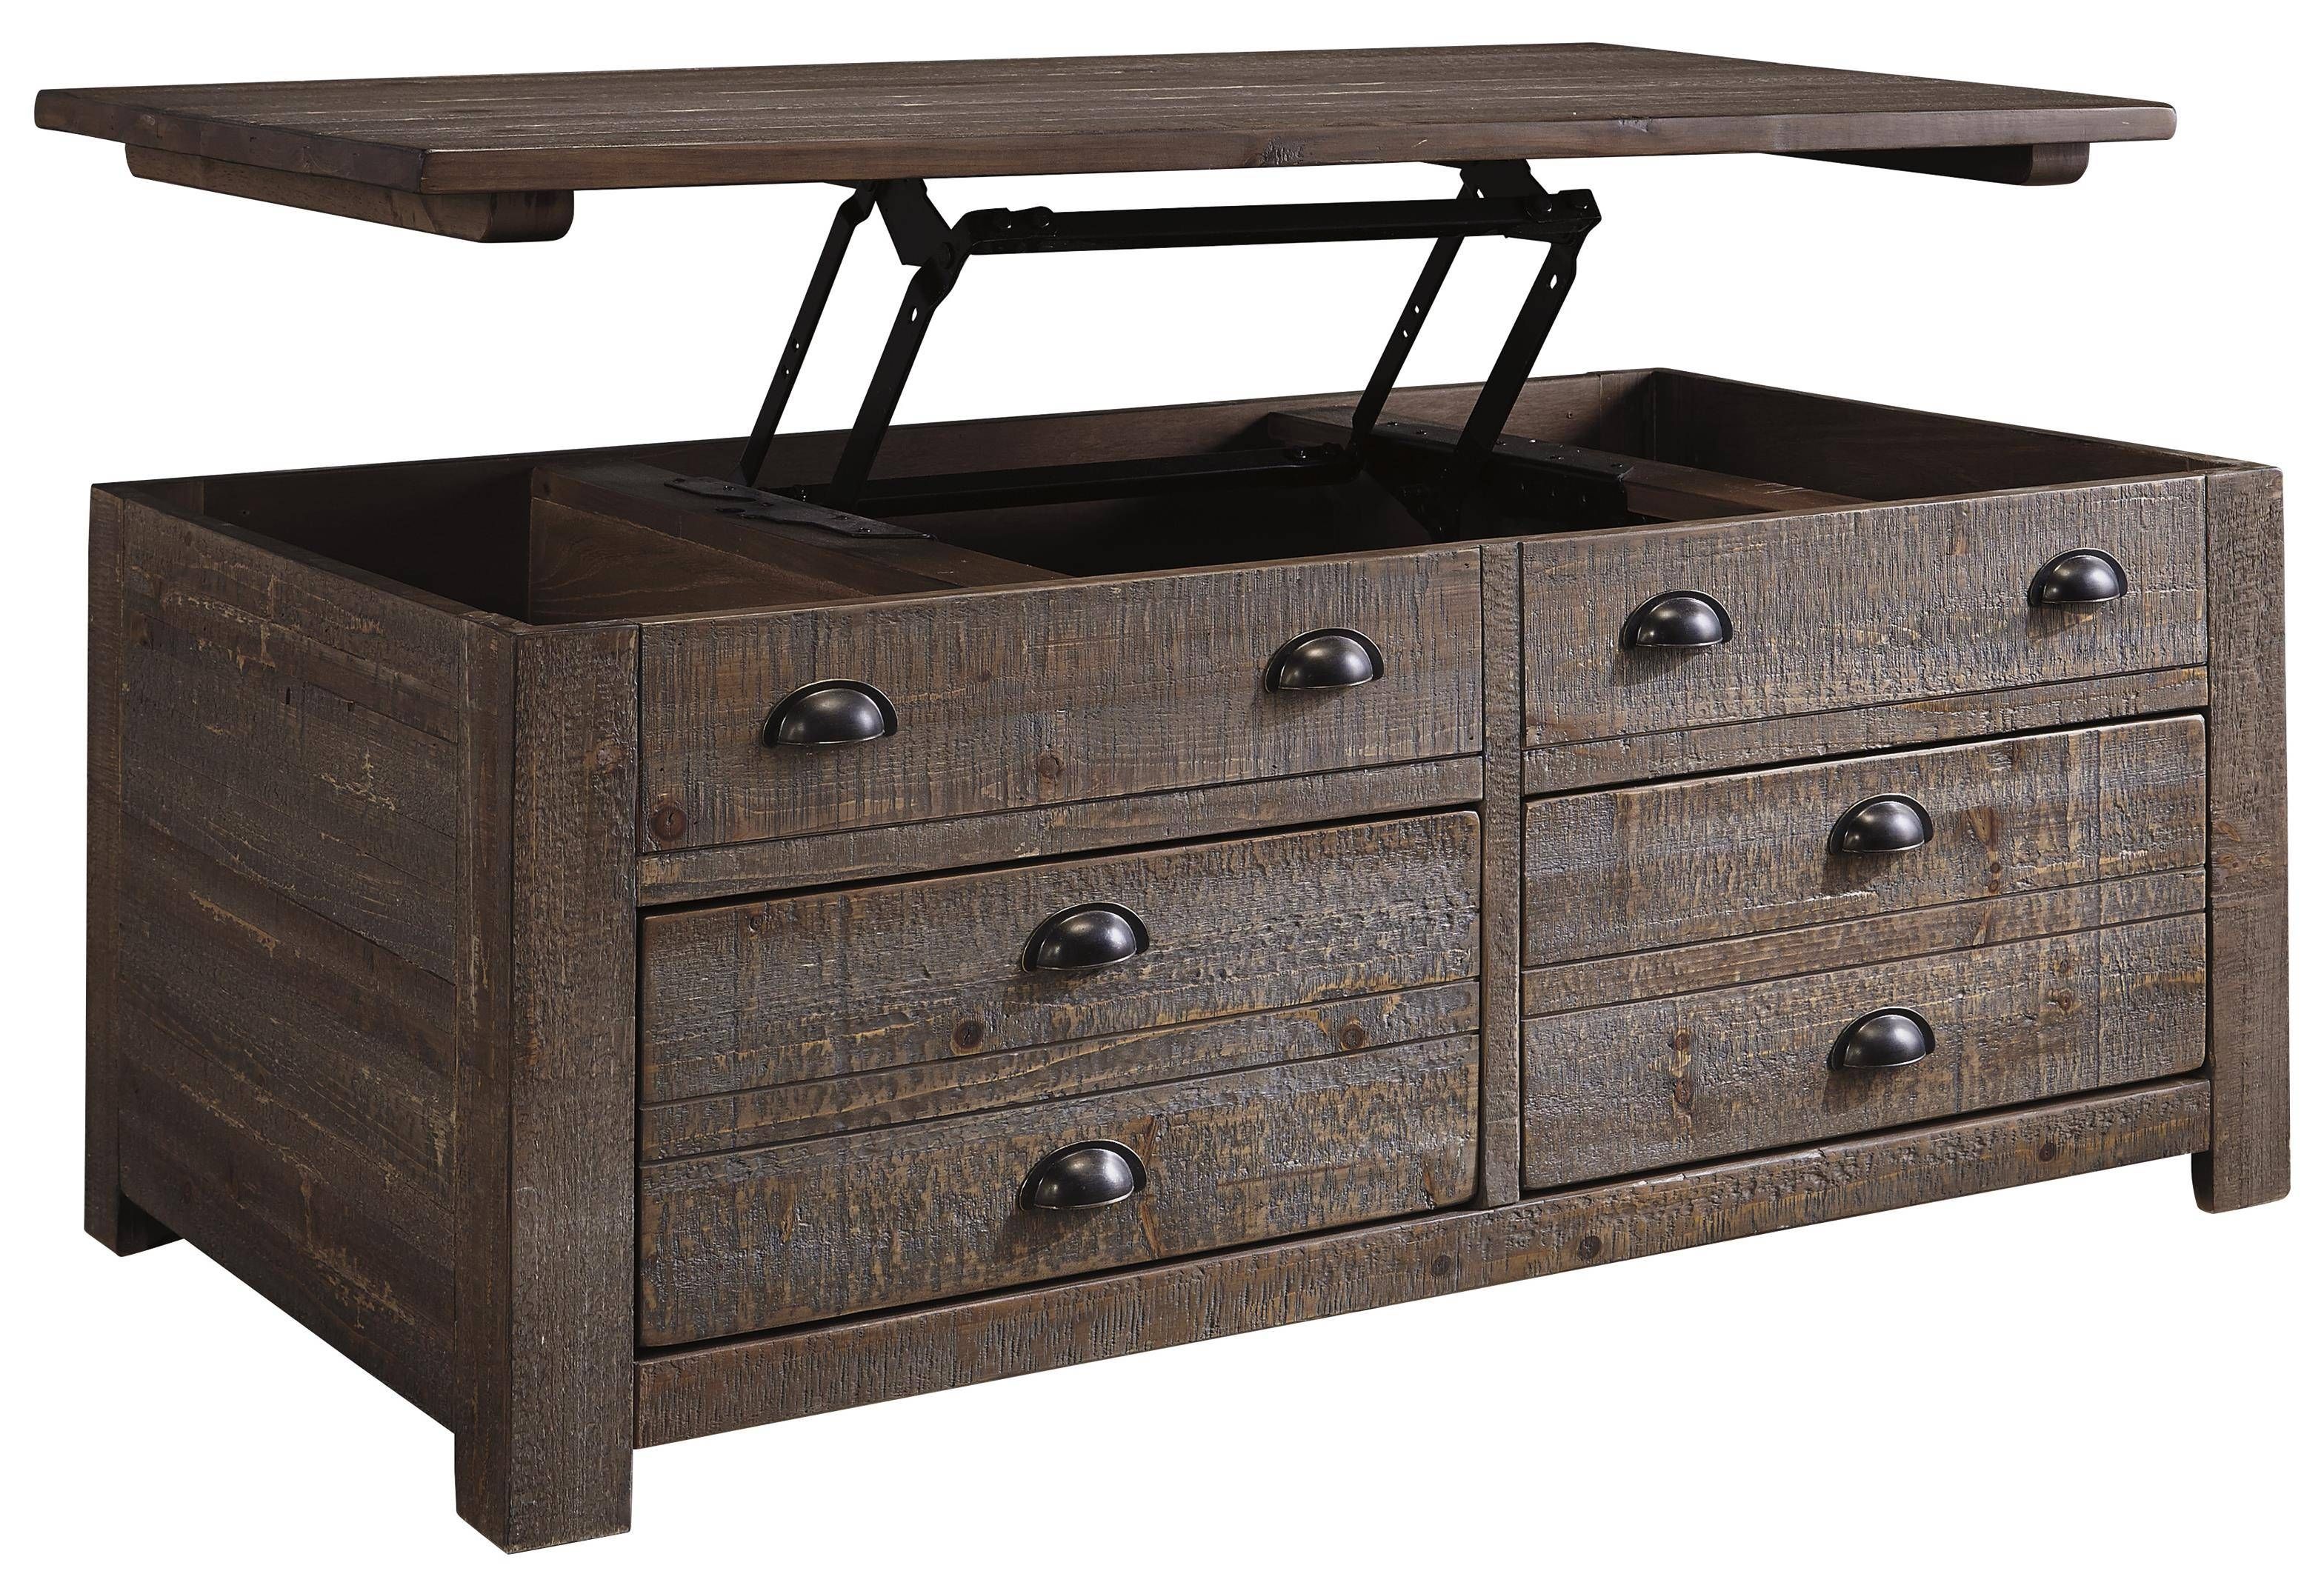 Rustic Pine Trunk Style Rectangular Lift Top Coffee Table With 2 Pertaining To Rustic Coffee Table Drawers (View 24 of 30)